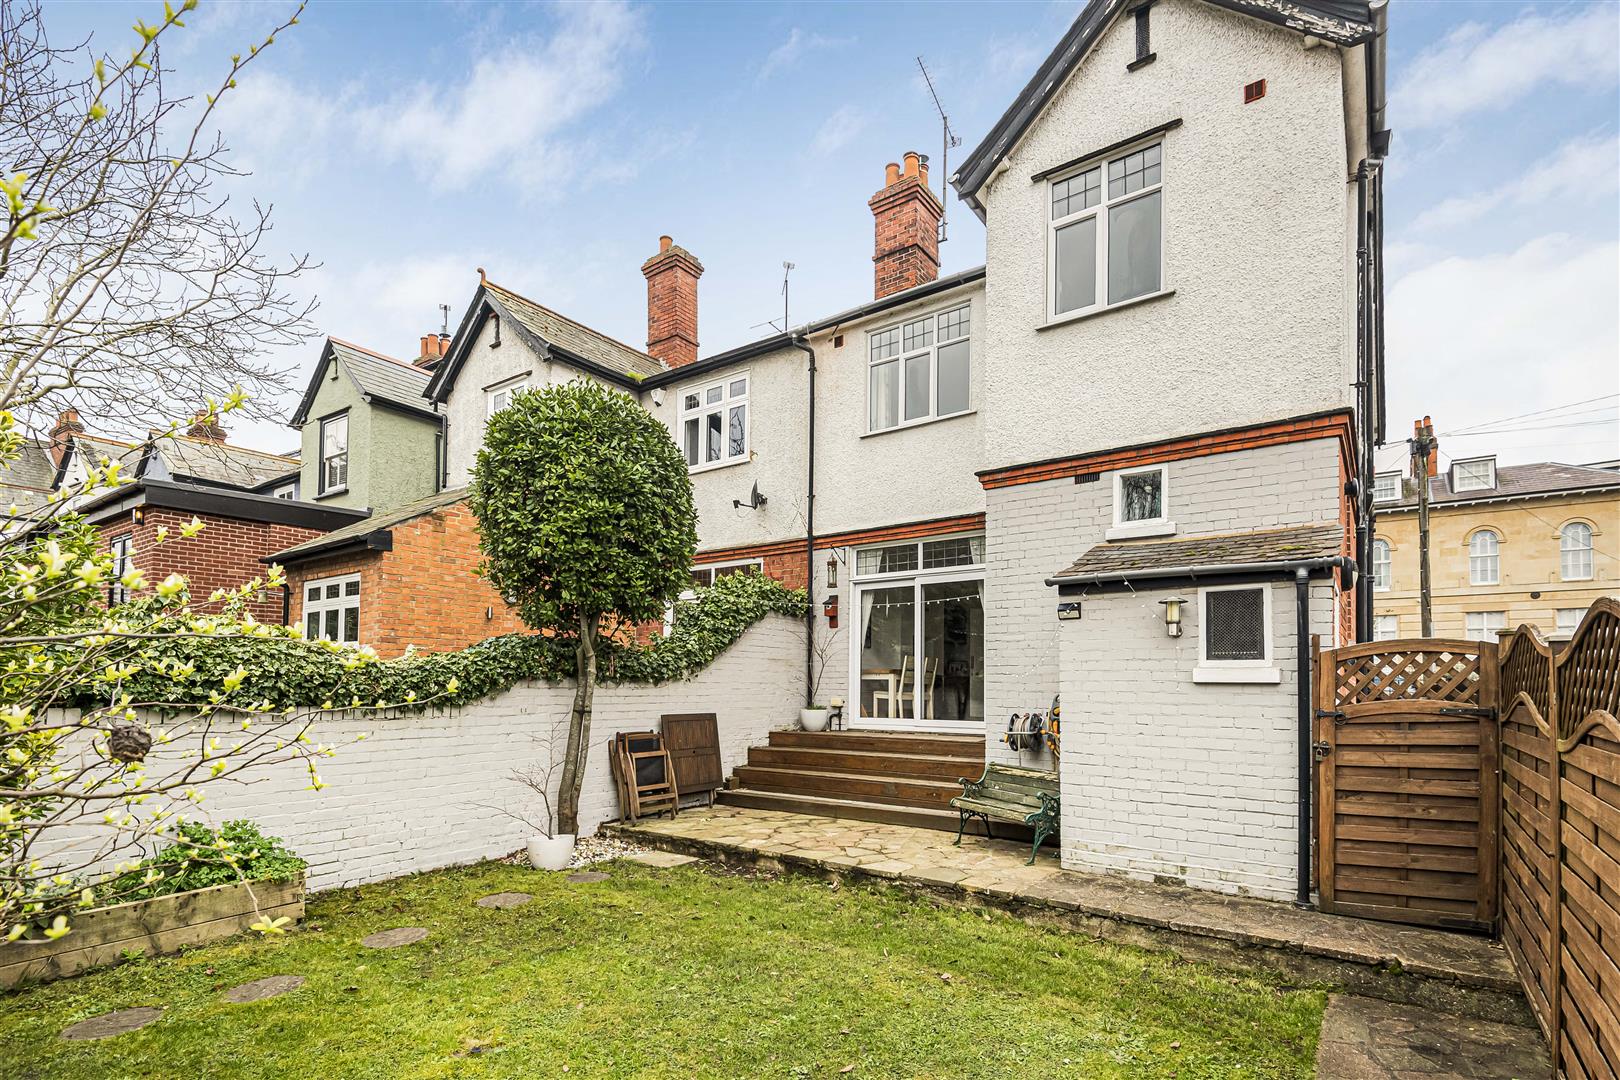 Russell Street Reading house for sale in Reading